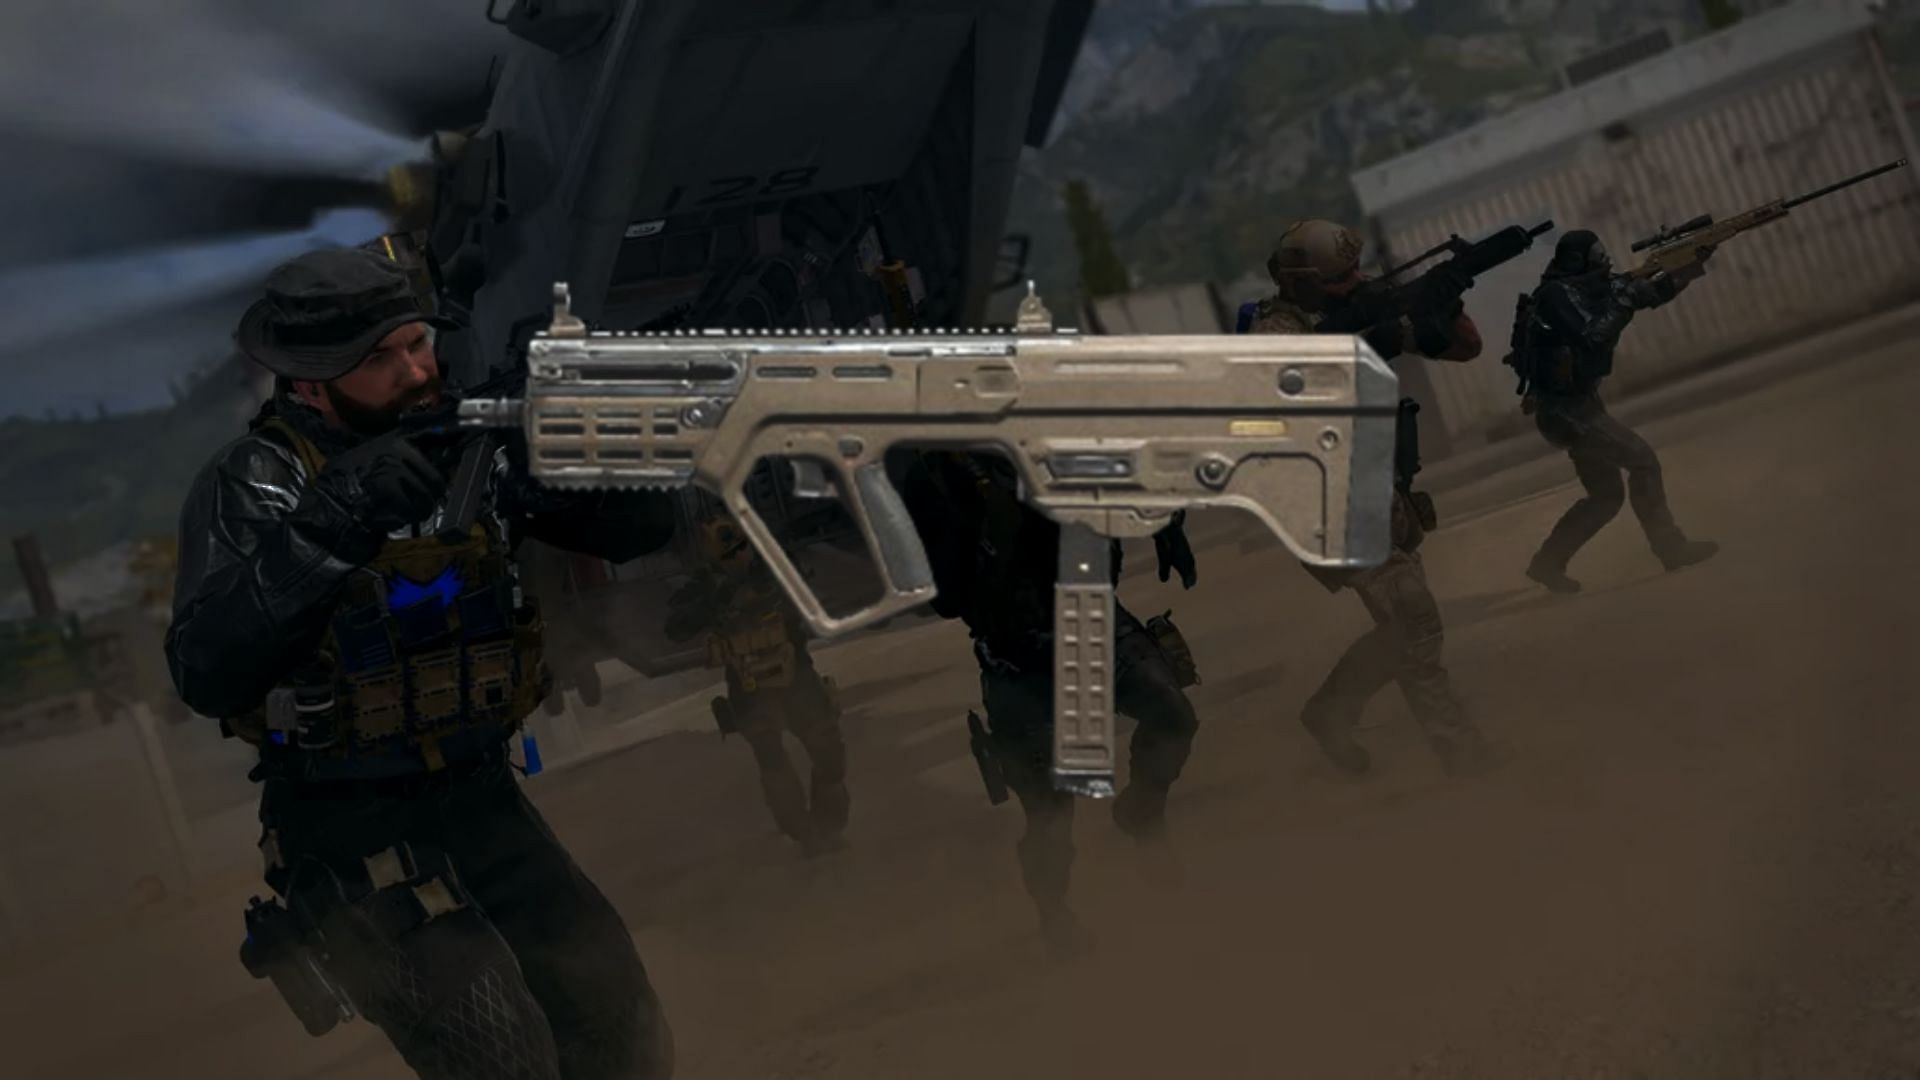 RAM-9 SMG in MW3 (Image via Activision)